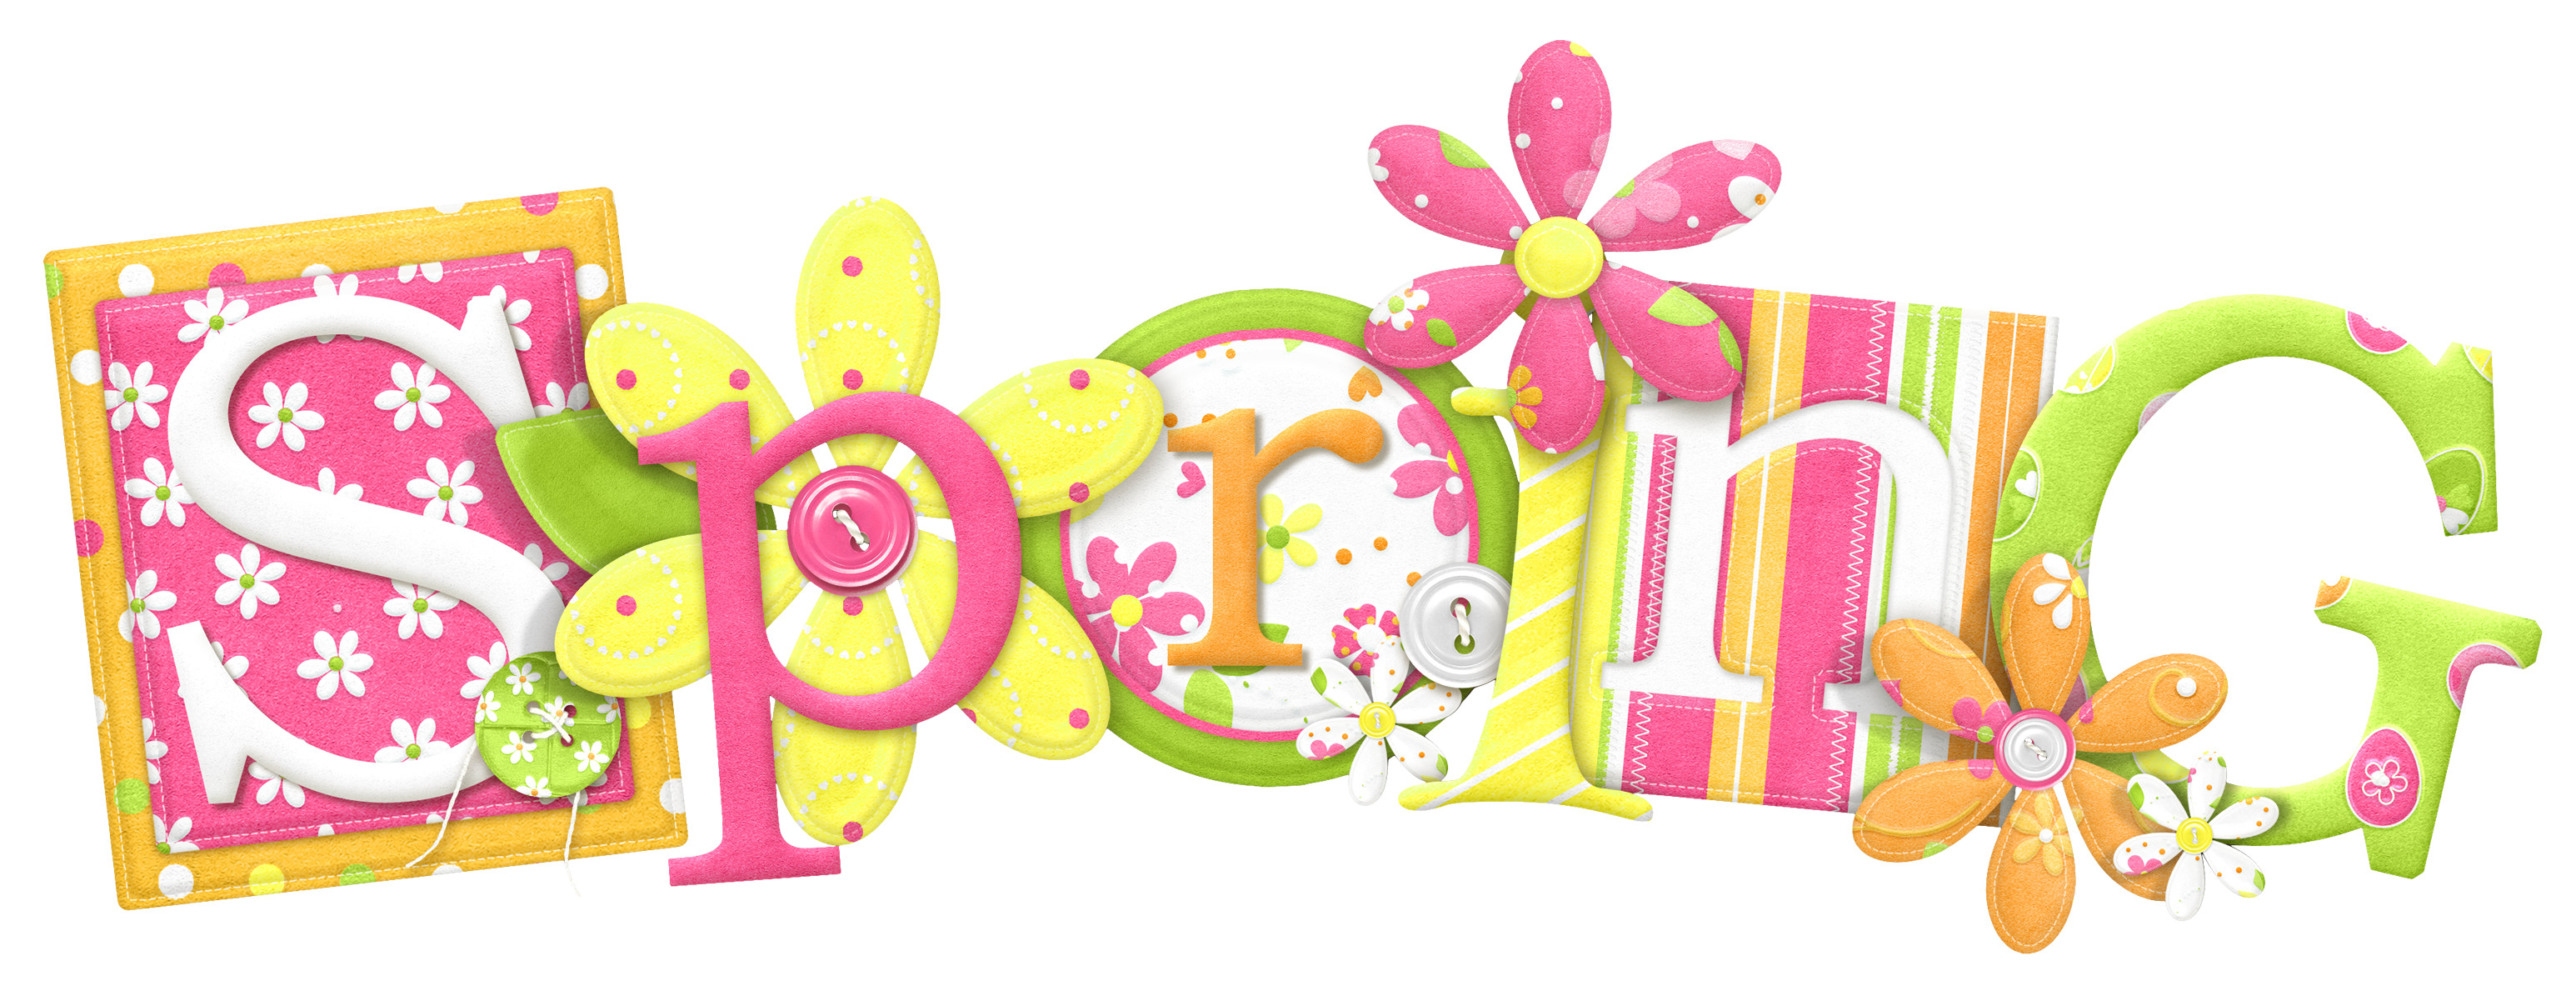 3092x1189 Spring Clipart